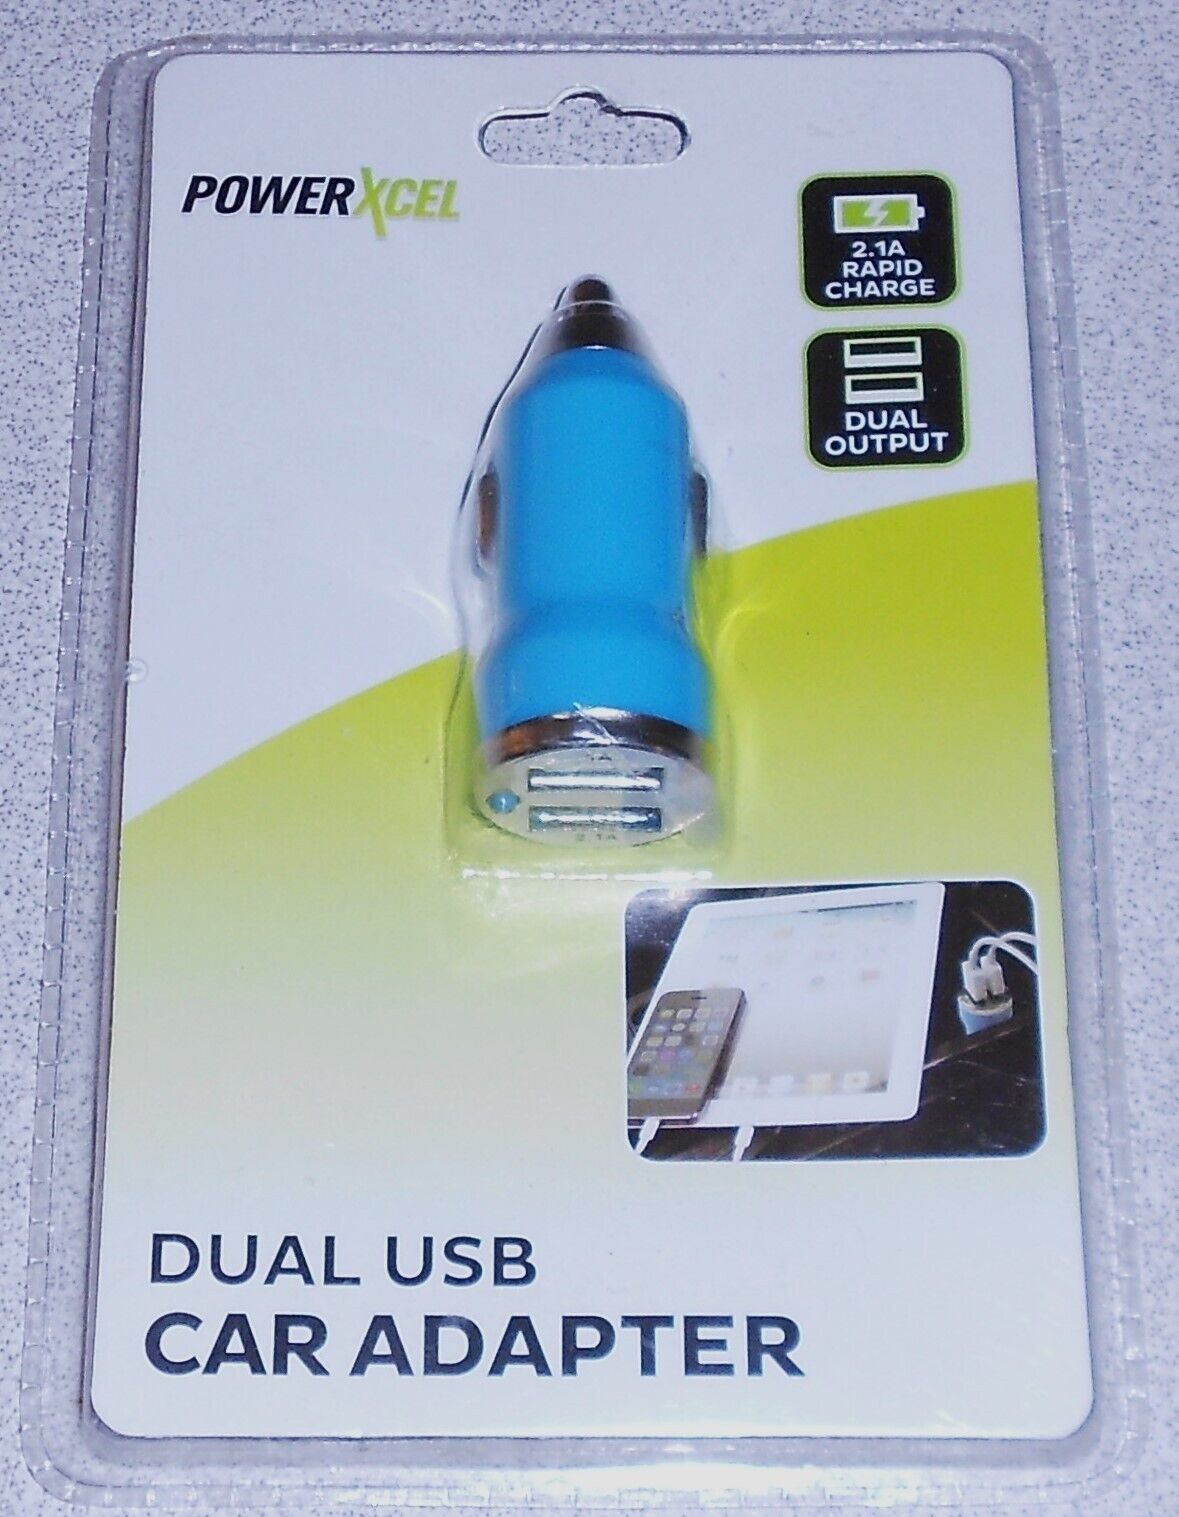 Dual USB Car Adapter brand new/still in package